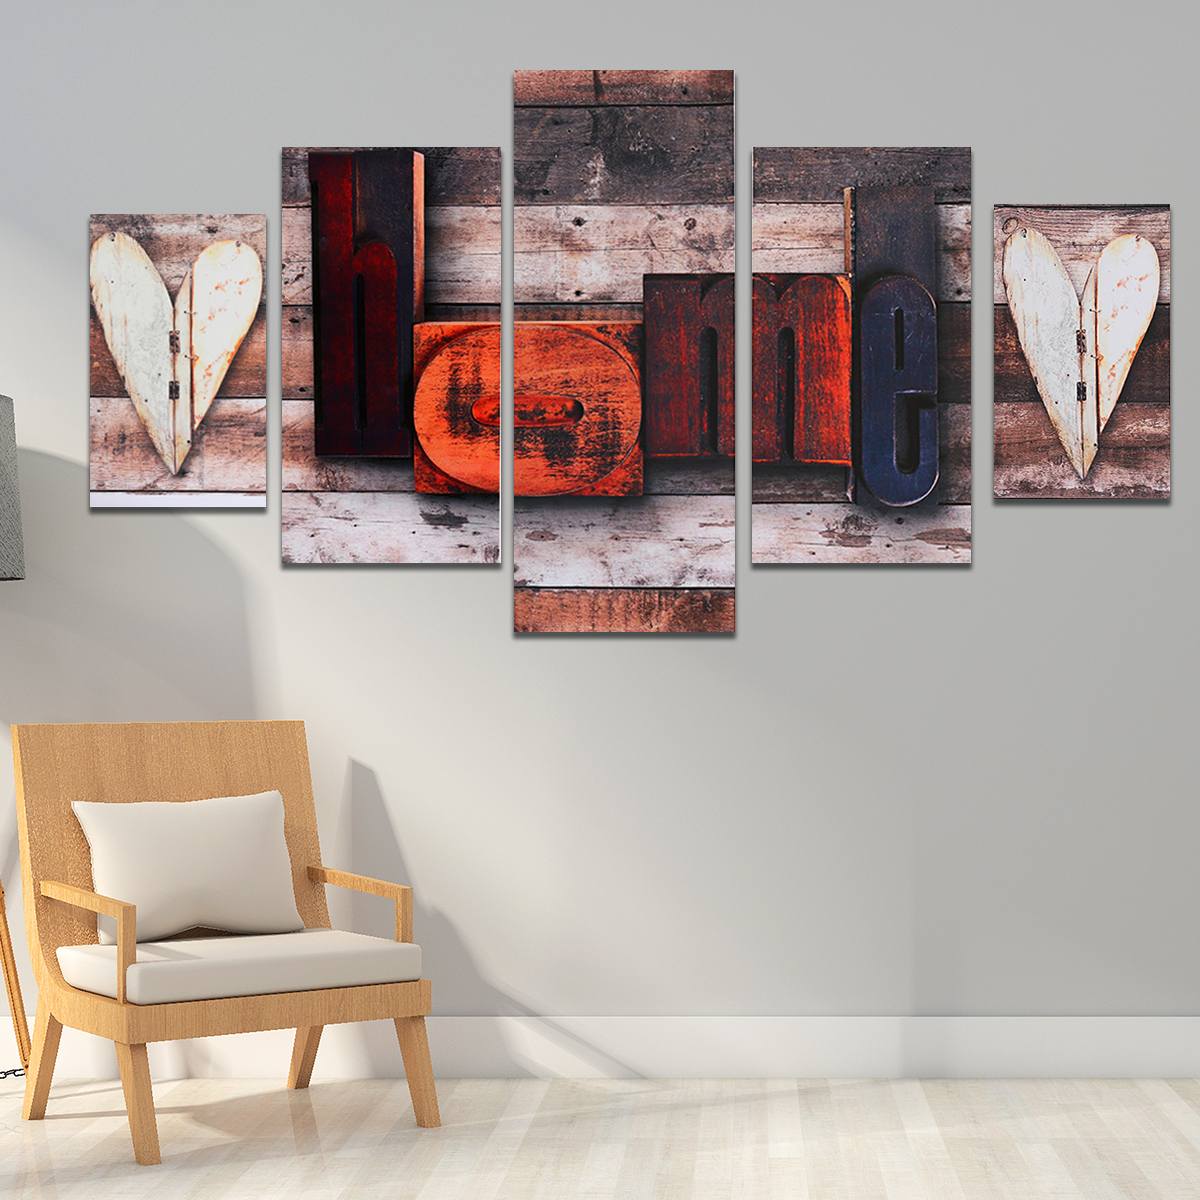 5Pcs-Canvas-Paintings-Love-HOME-Wall-Decorative-Print-Art-Pictures-Unframed-Wall-Hanging-Home-Office-1785063-4